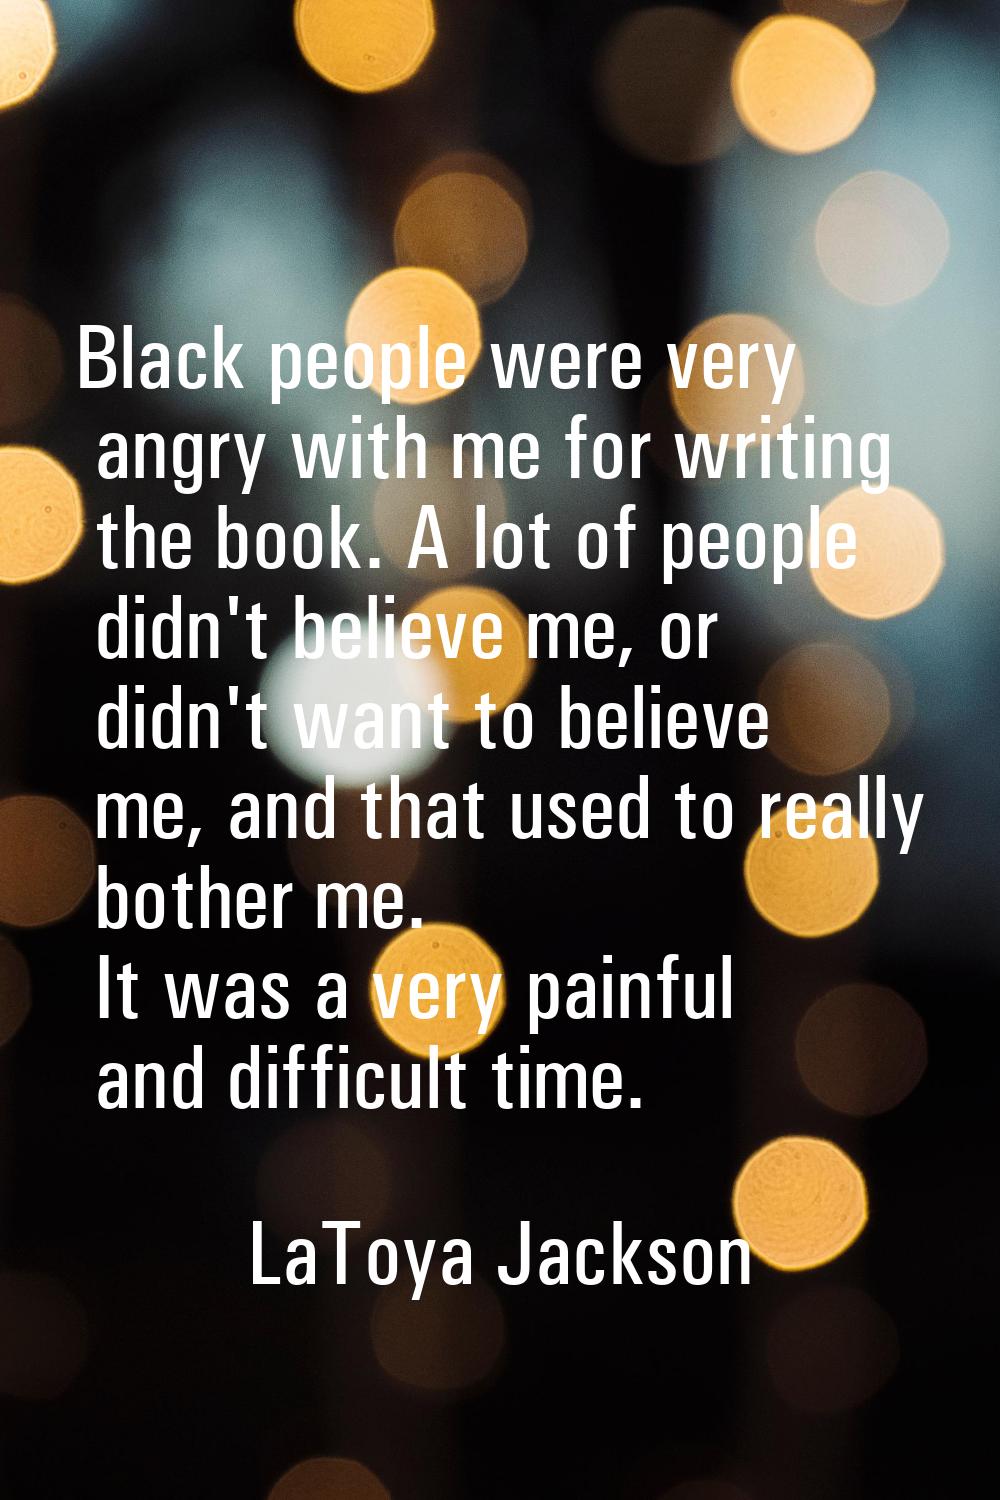 Black people were very angry with me for writing the book. A lot of people didn't believe me, or di